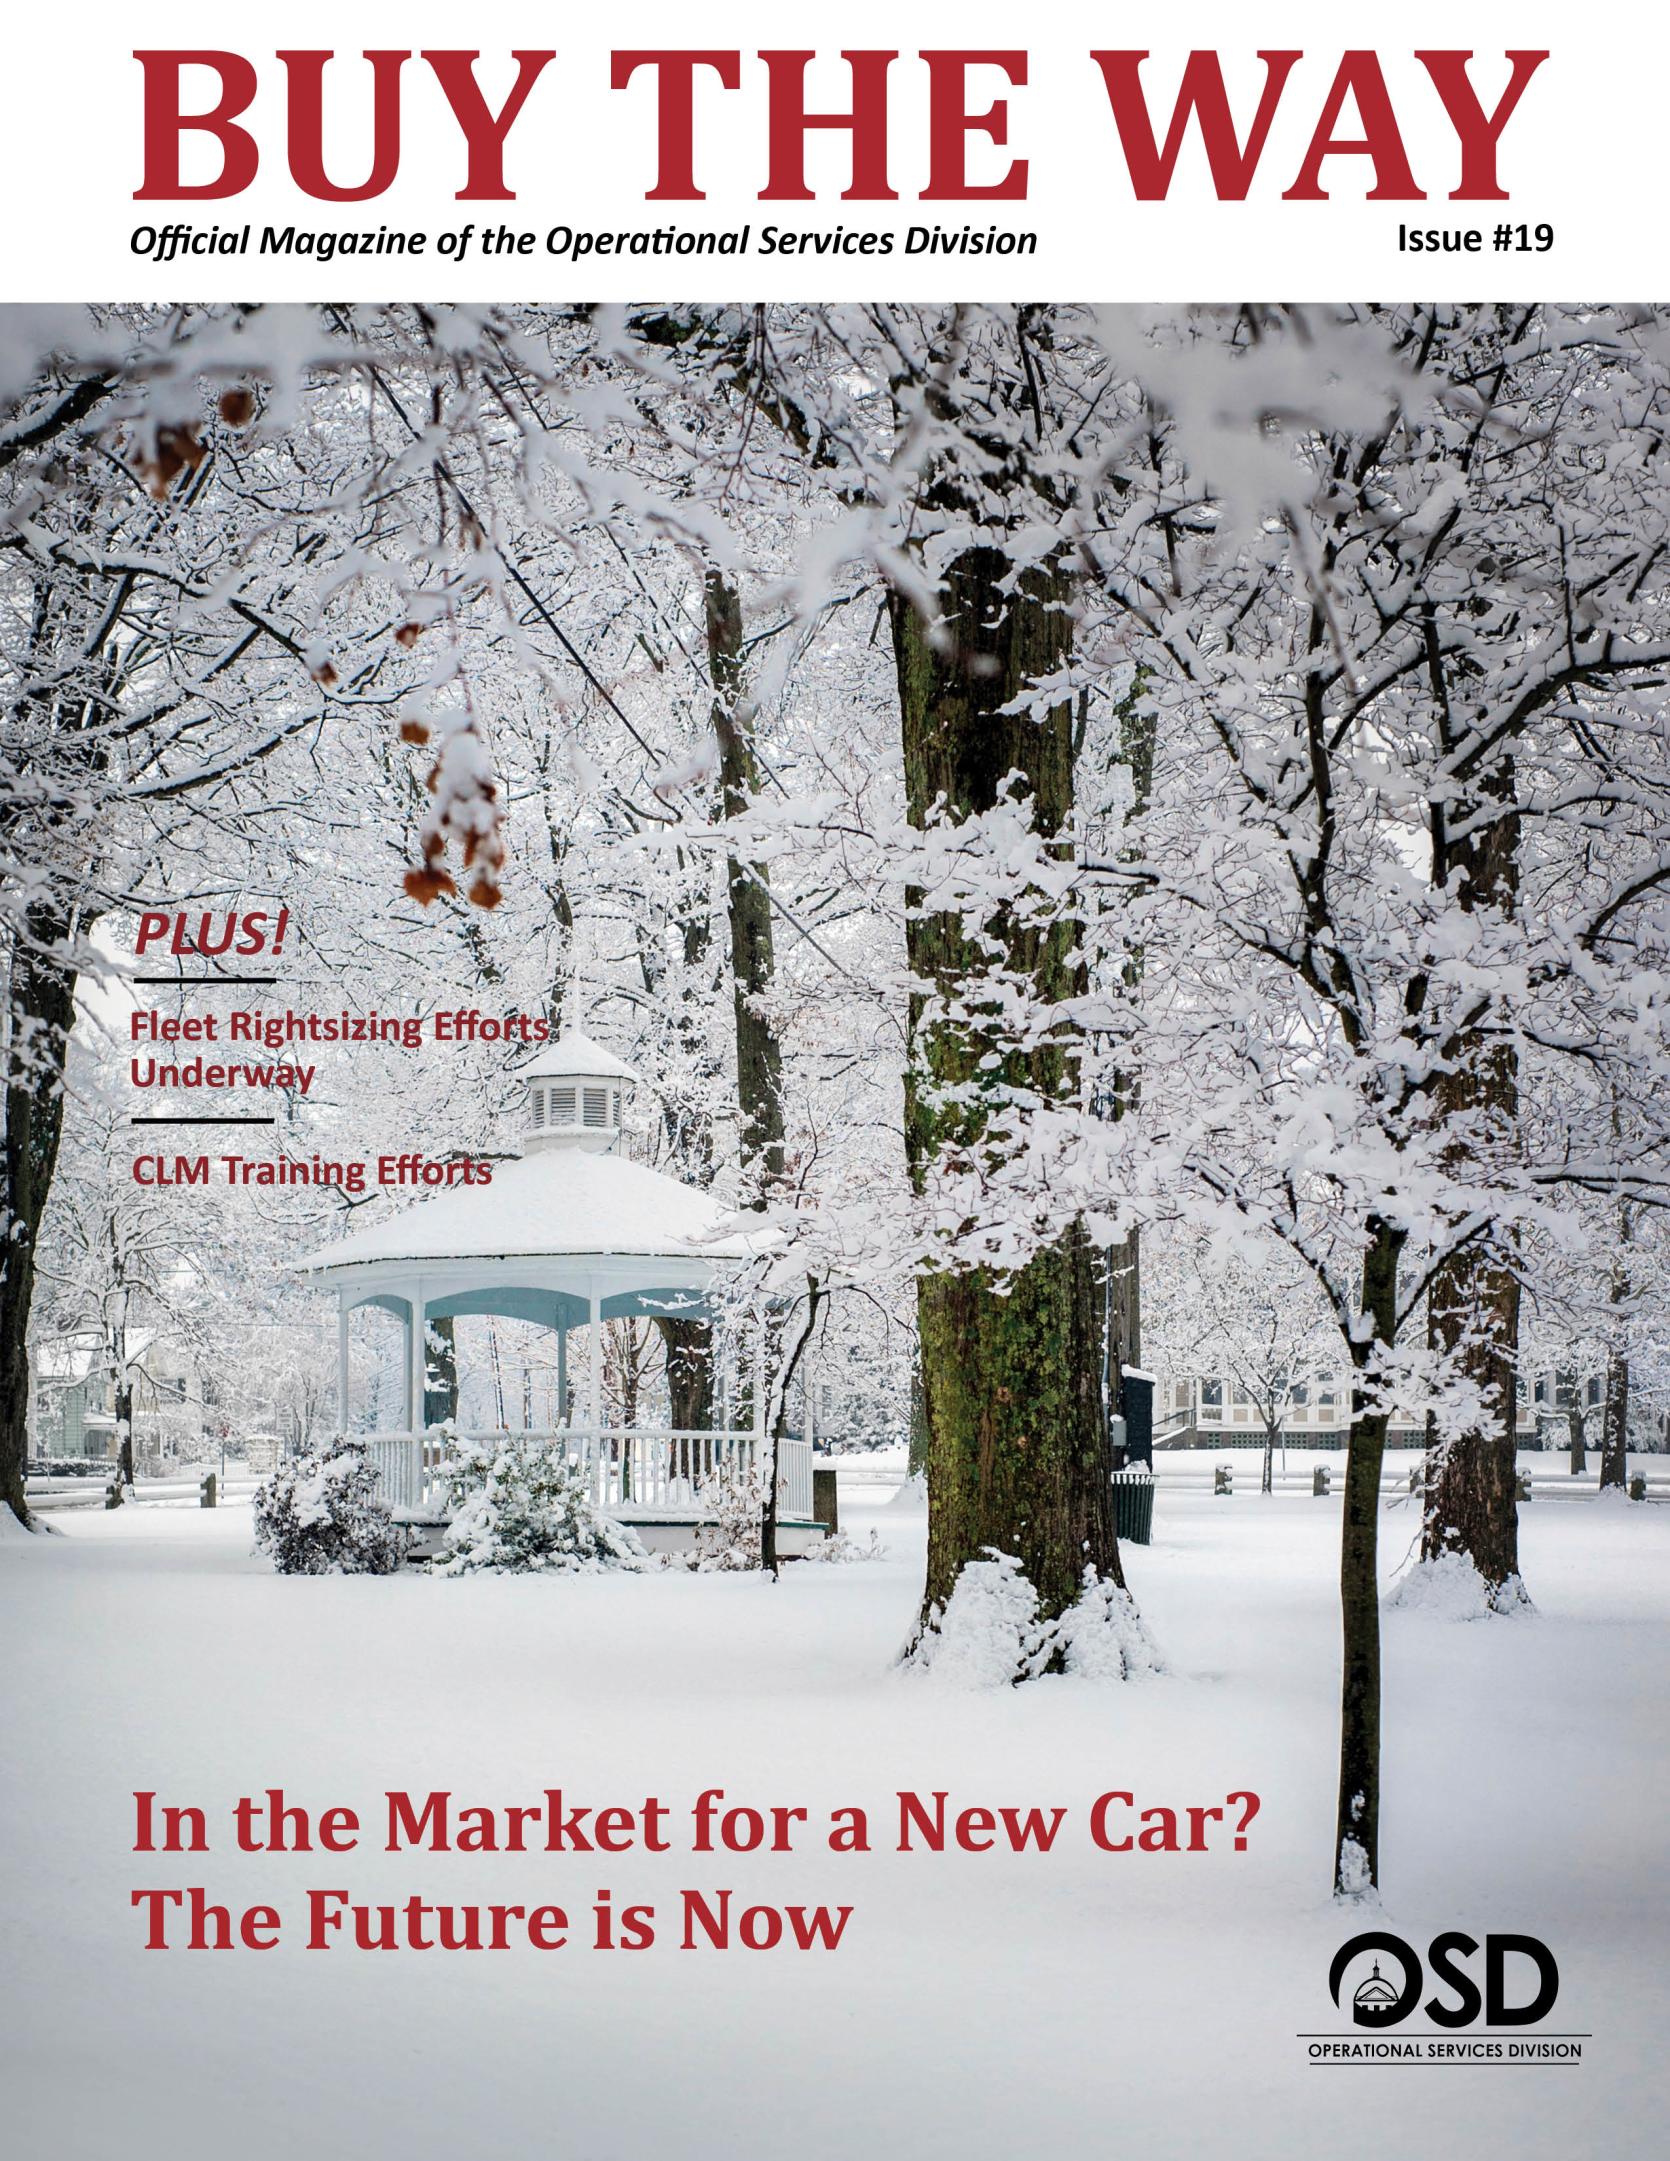 Buy the Way issue #19 cover: snowy park scene. 